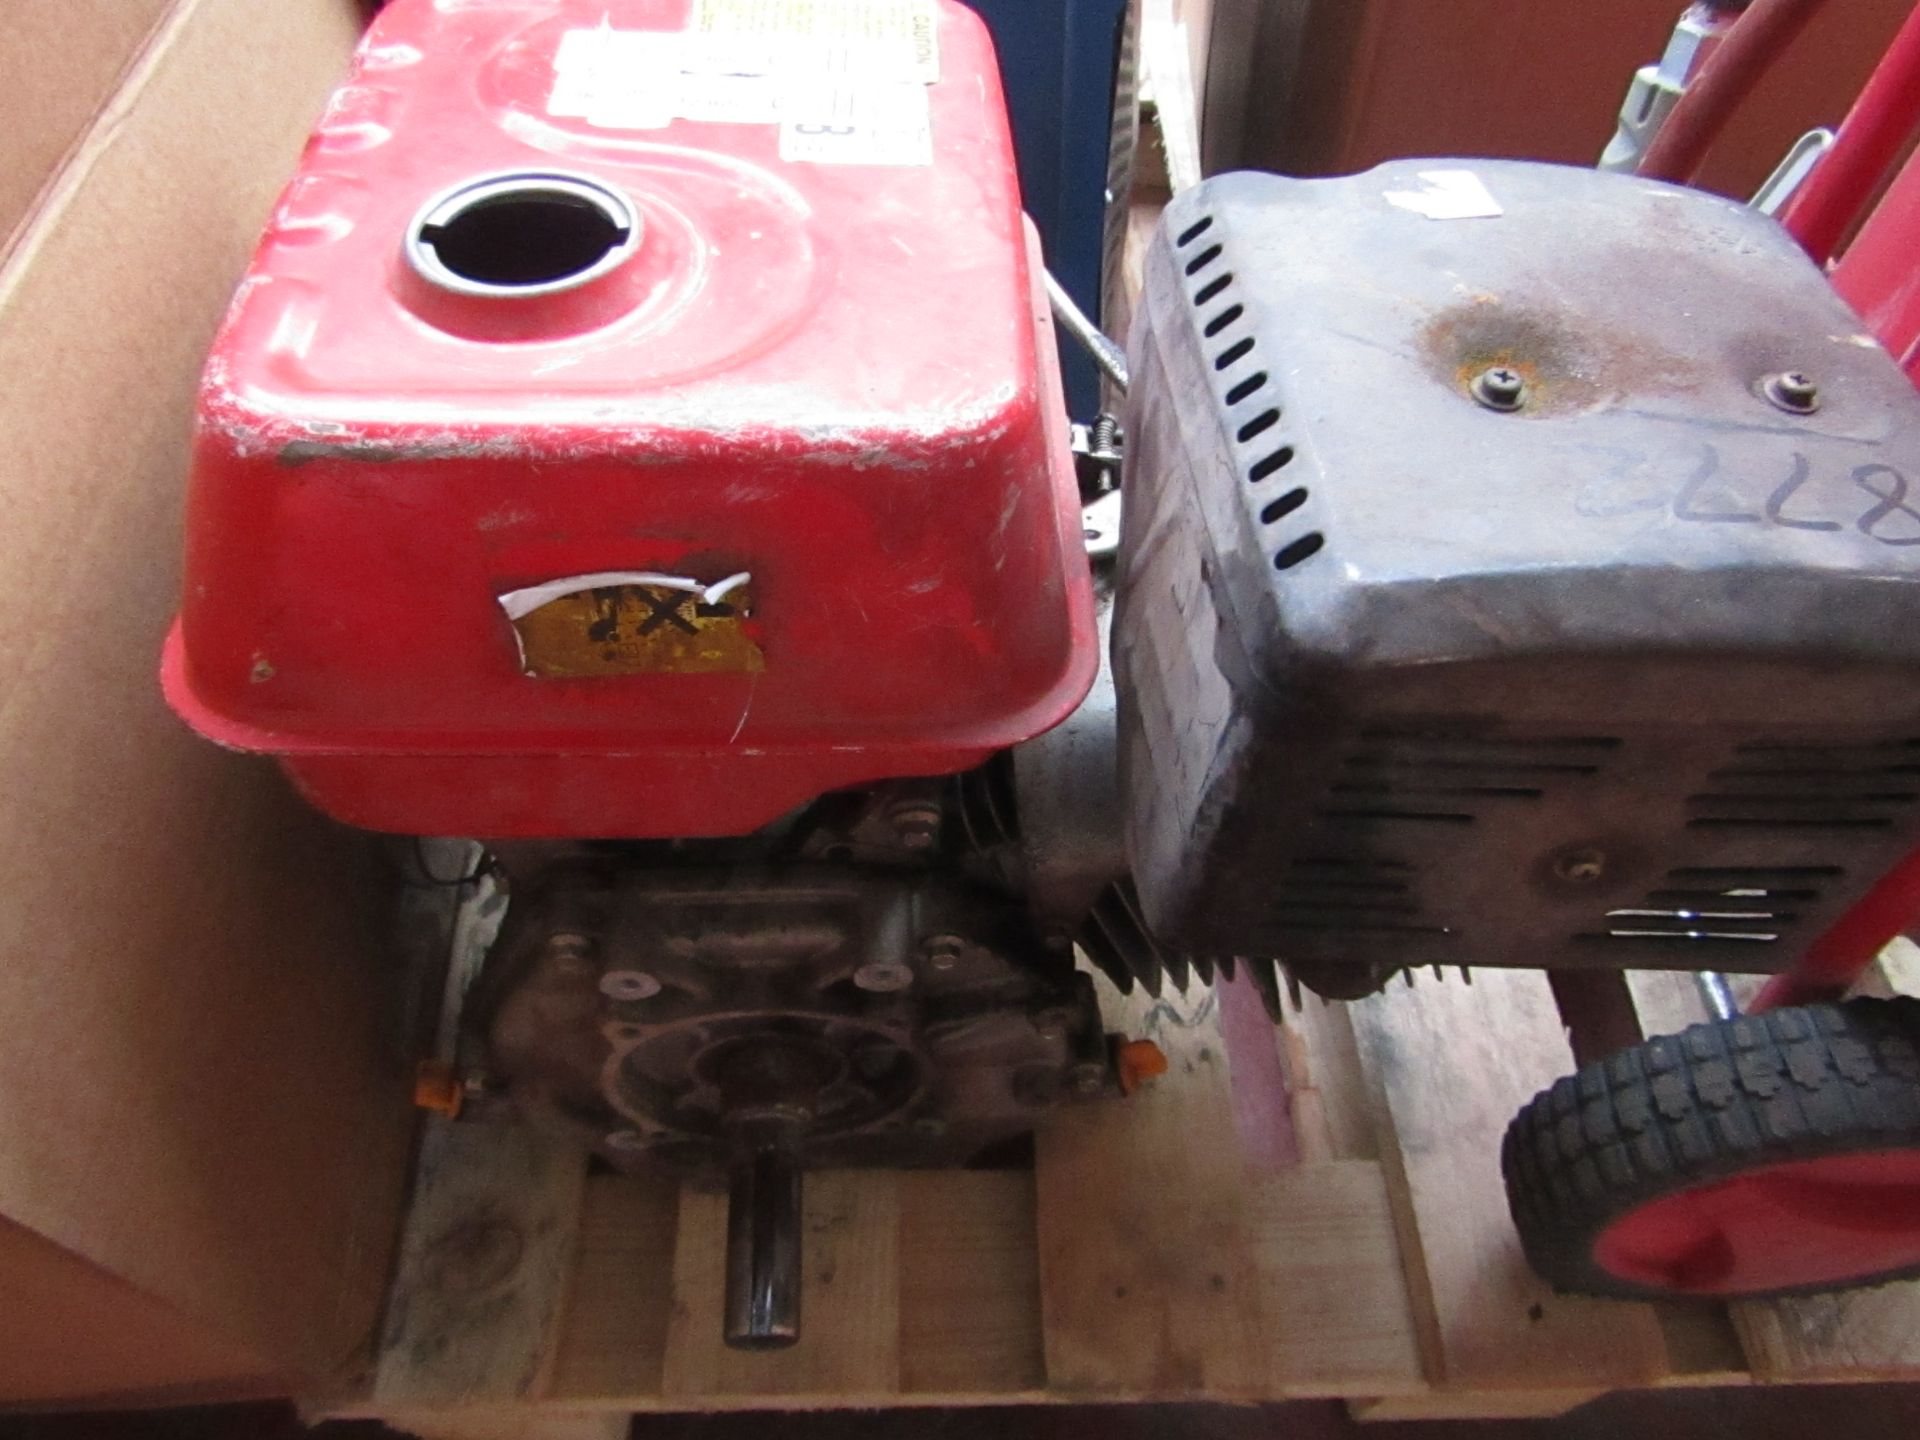 1x PLS260 ENGINE 8772, This lot is a Machine Mart product which is raw and Compressorletely